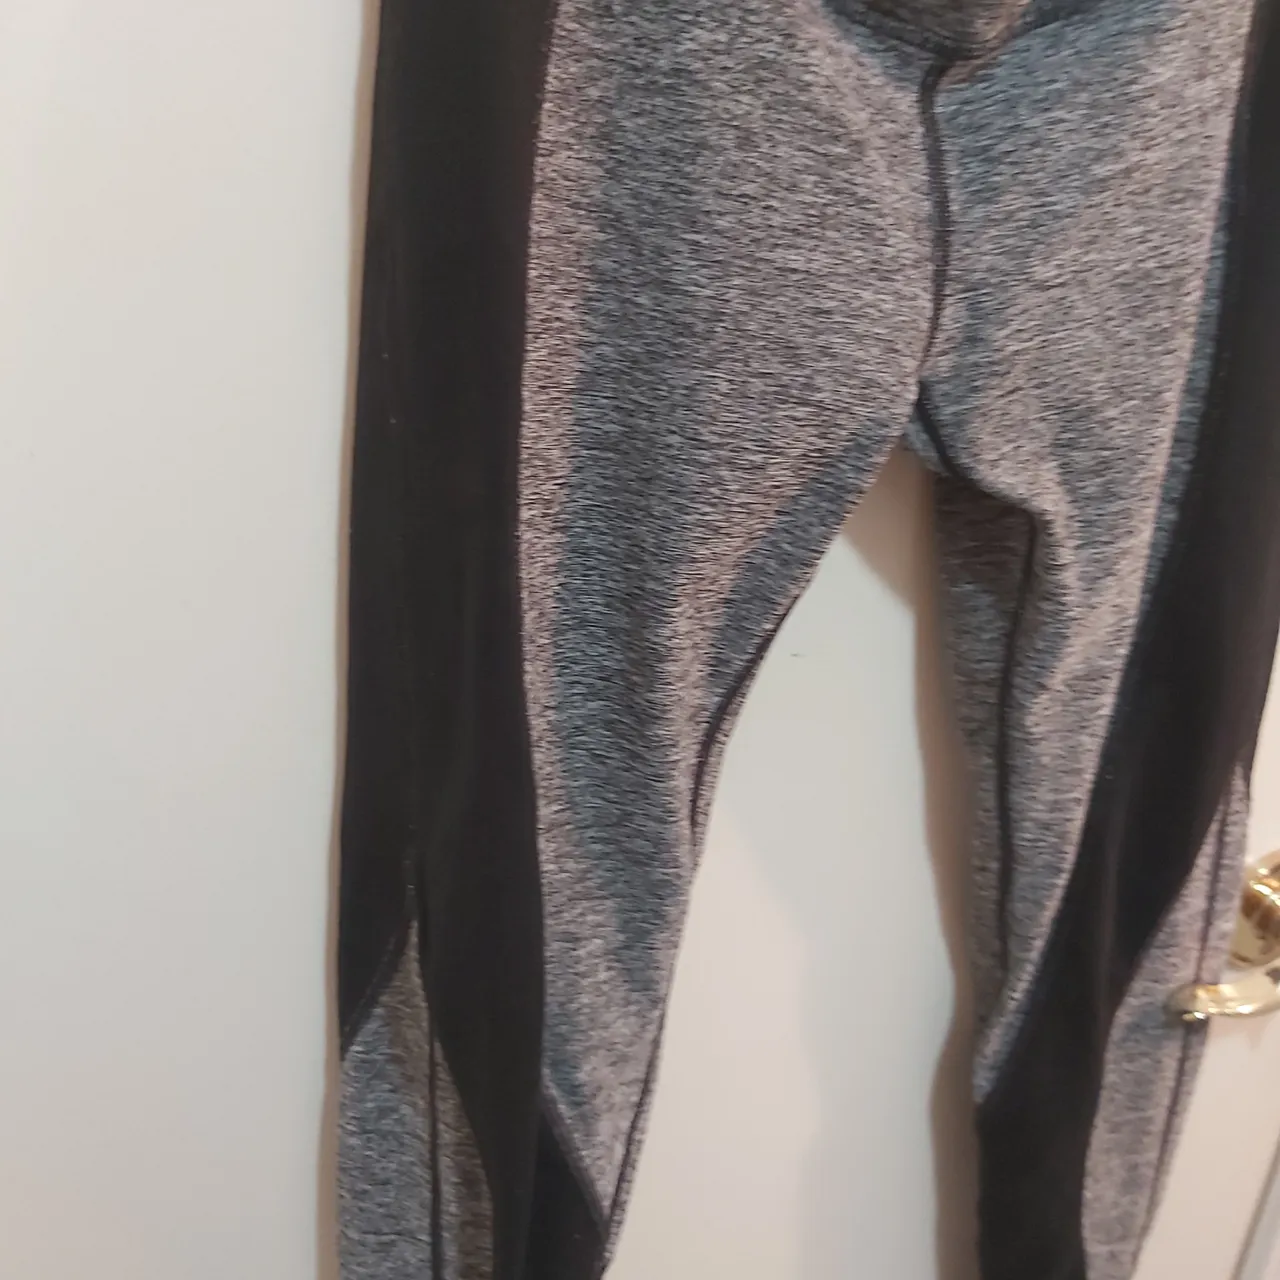 Grey and black workout leggings photo 5